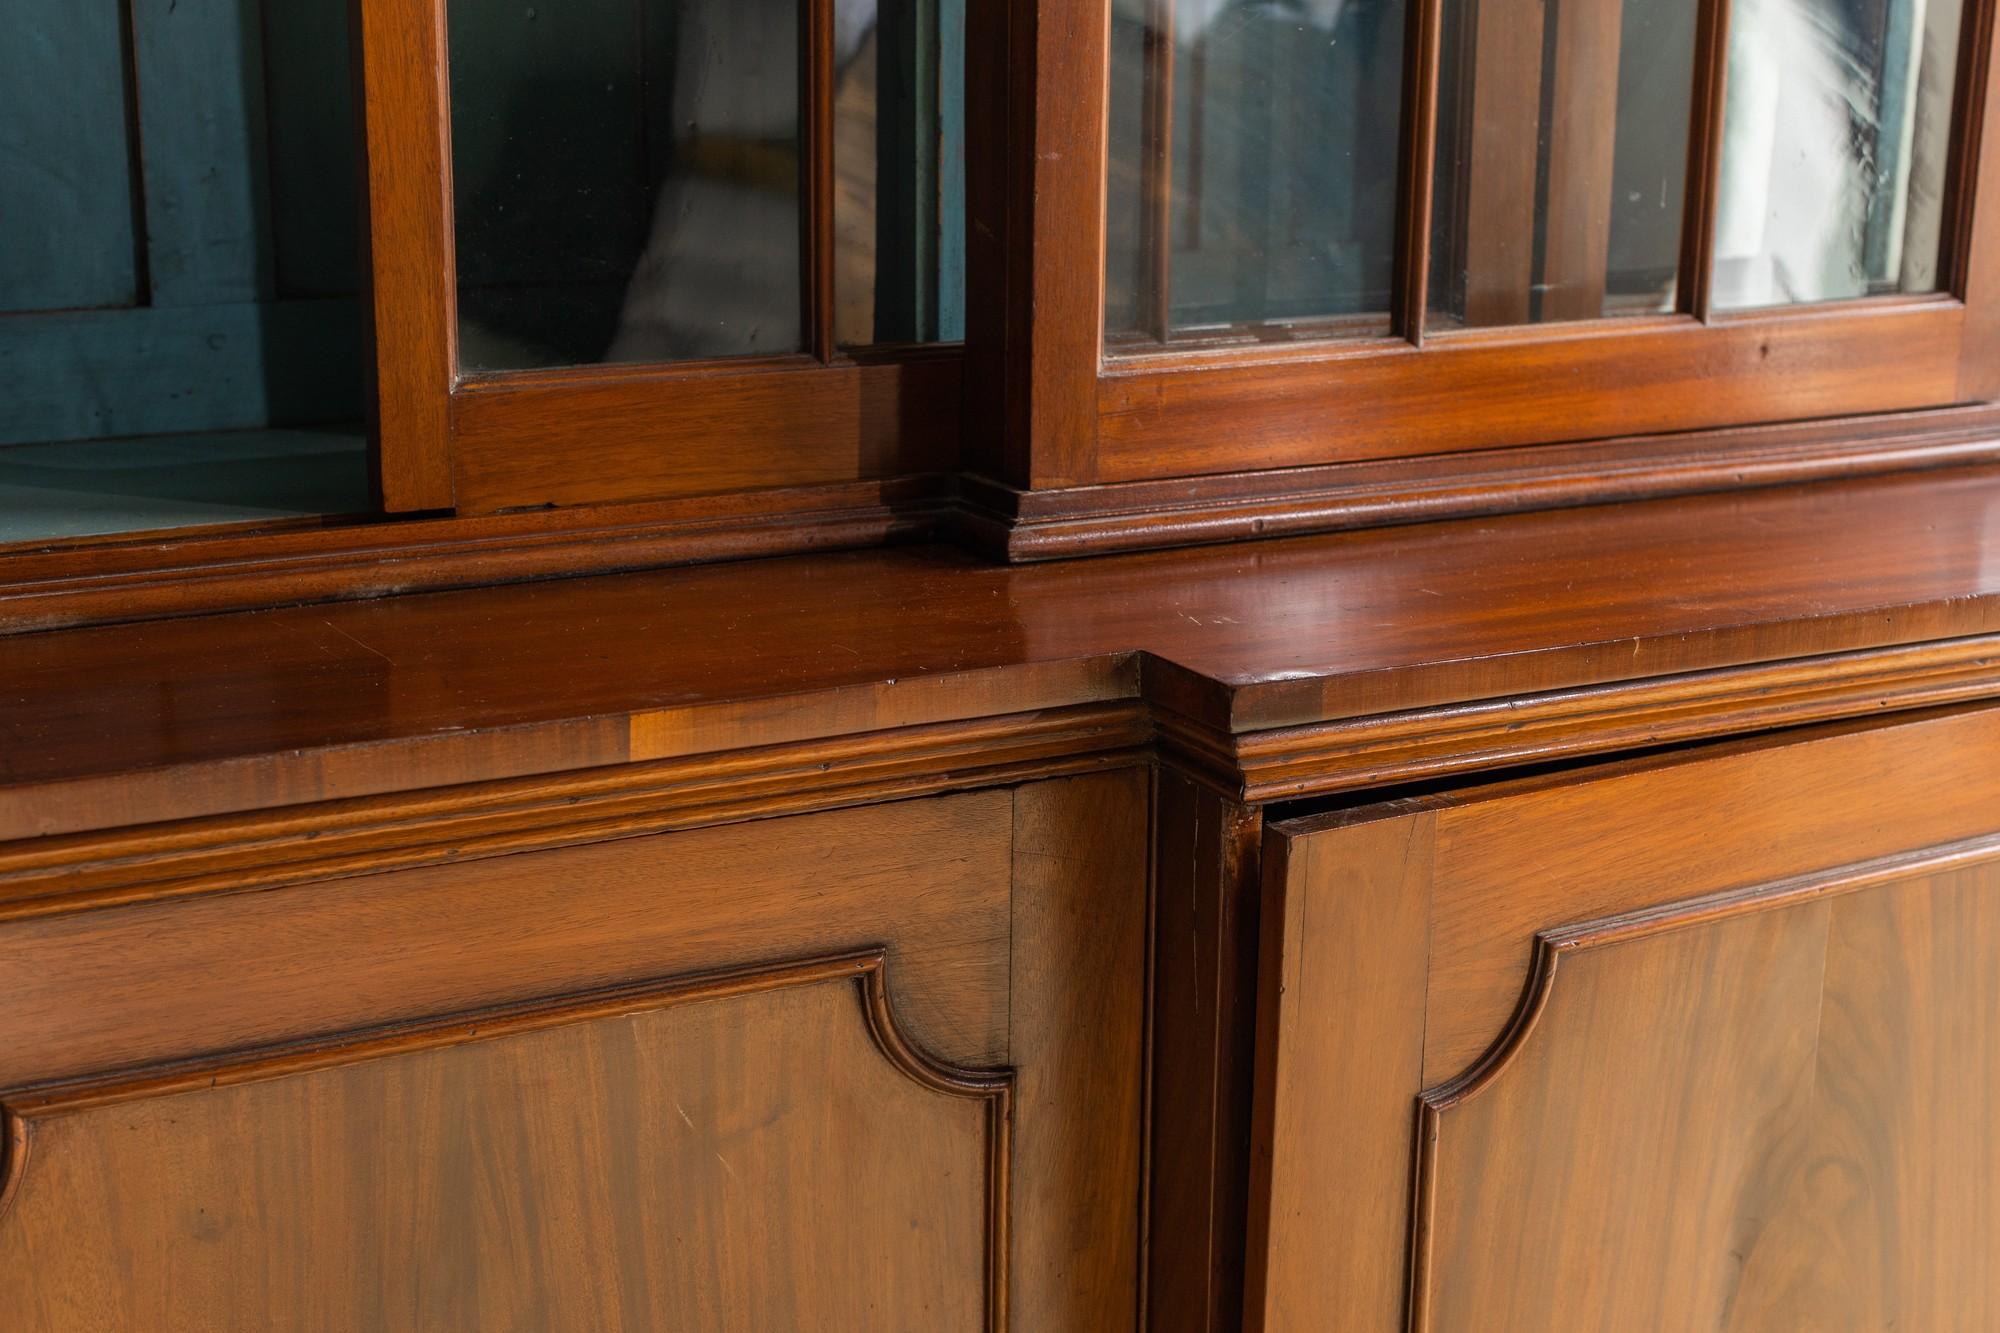 This early 19th century Georgian breakfront bookcase has a beautiful medium brown stain finish on its mahogany wood. The glass is original and there is dentil molding at the crown. The interior of this piece is painted blue with three interior